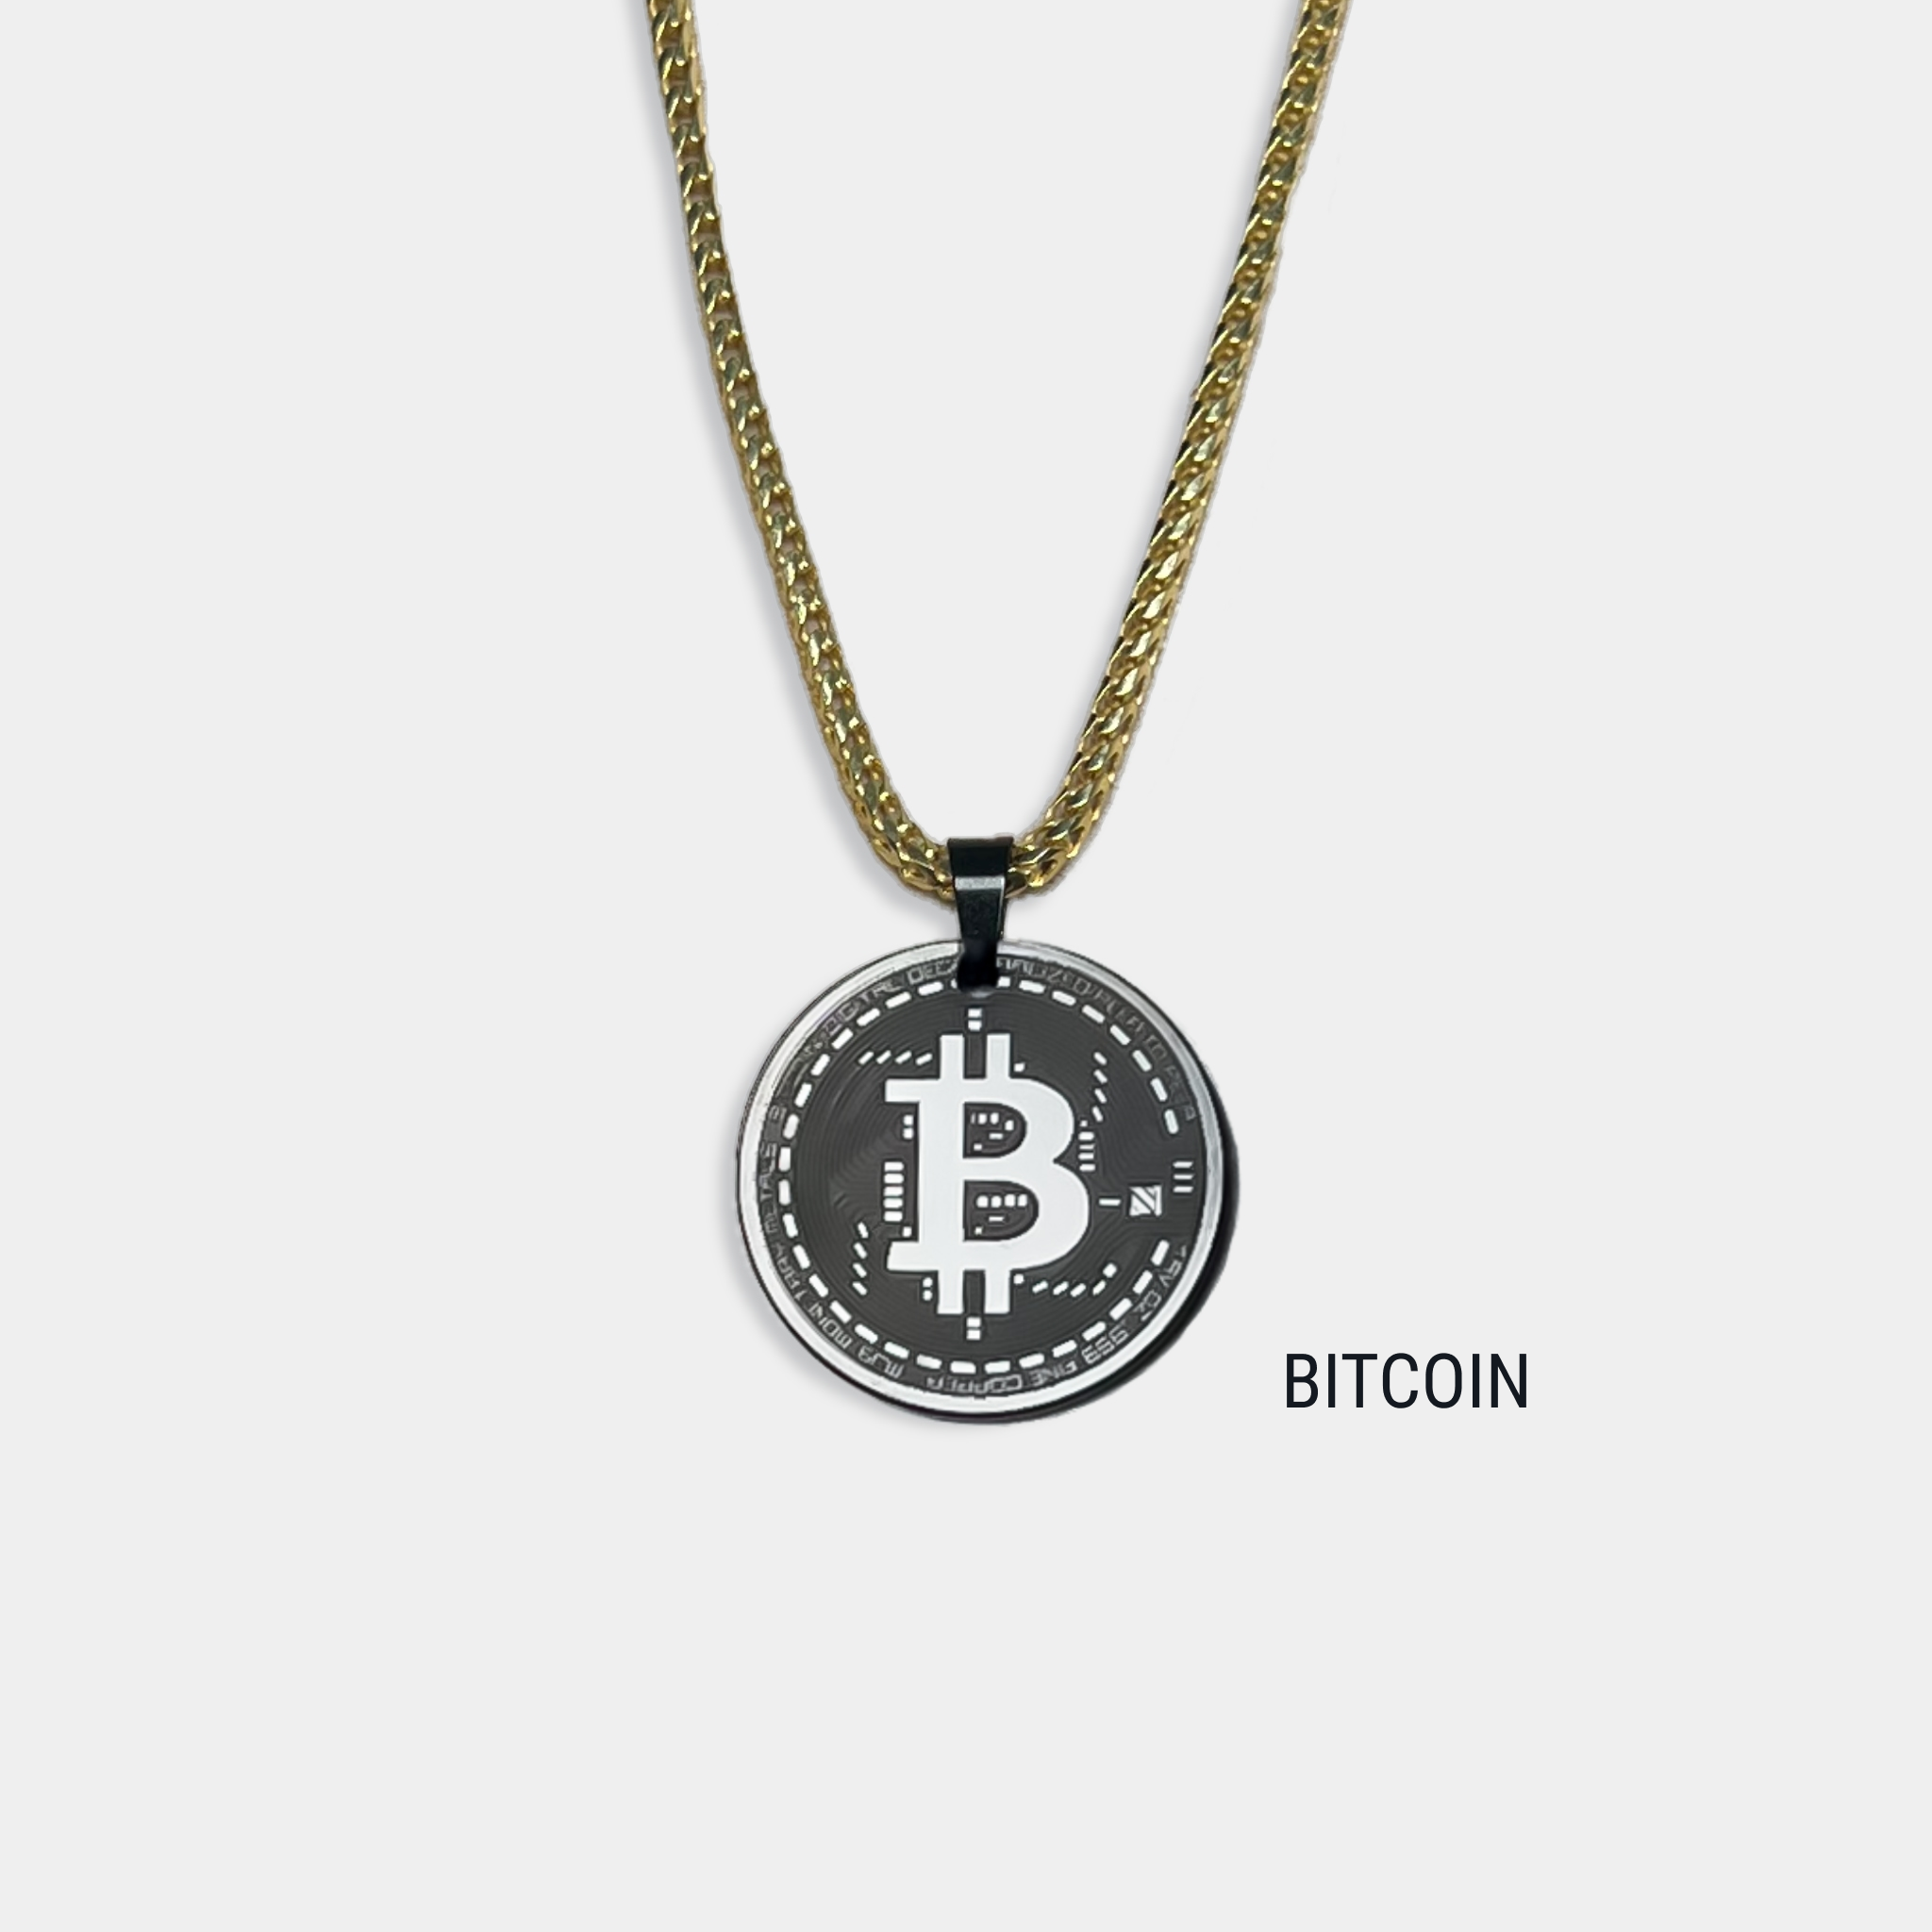 Photo of round solid black diamond pendant with bitcoin symbol engraved, attached to gold chain